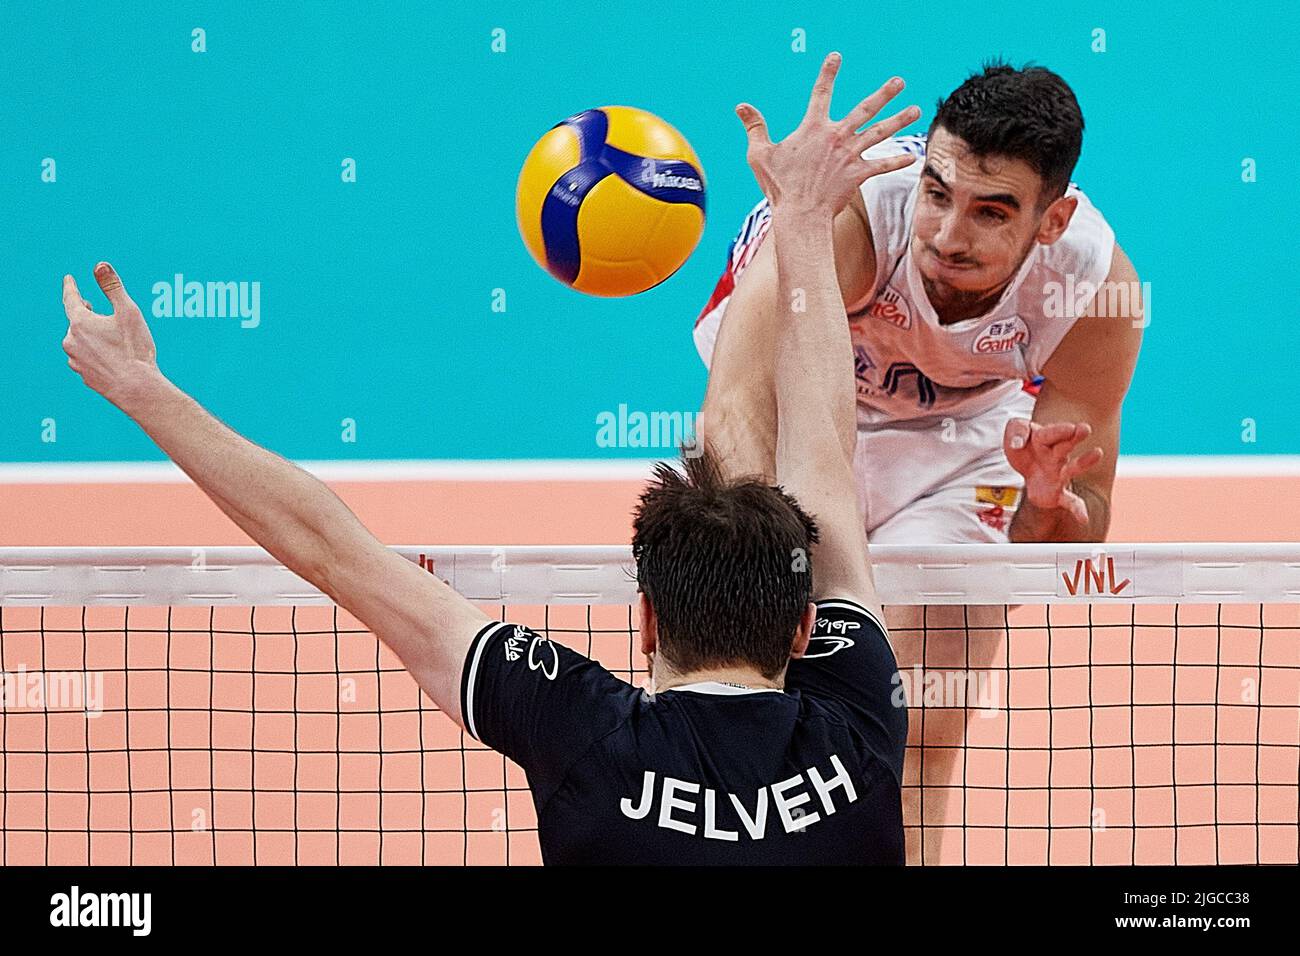 Gdansk, Poland. 09th July, 2022. Jelveh Ghaziani Mahdi (L) of Iran and Miran Kujundzic (R) of Serbia during the 2022 men's FIVB Volleyball Nations League match between Iran and Serbia in Gdansk, Poland, 09 July 2022. Credit: PAP/Alamy Live News Stock Photo